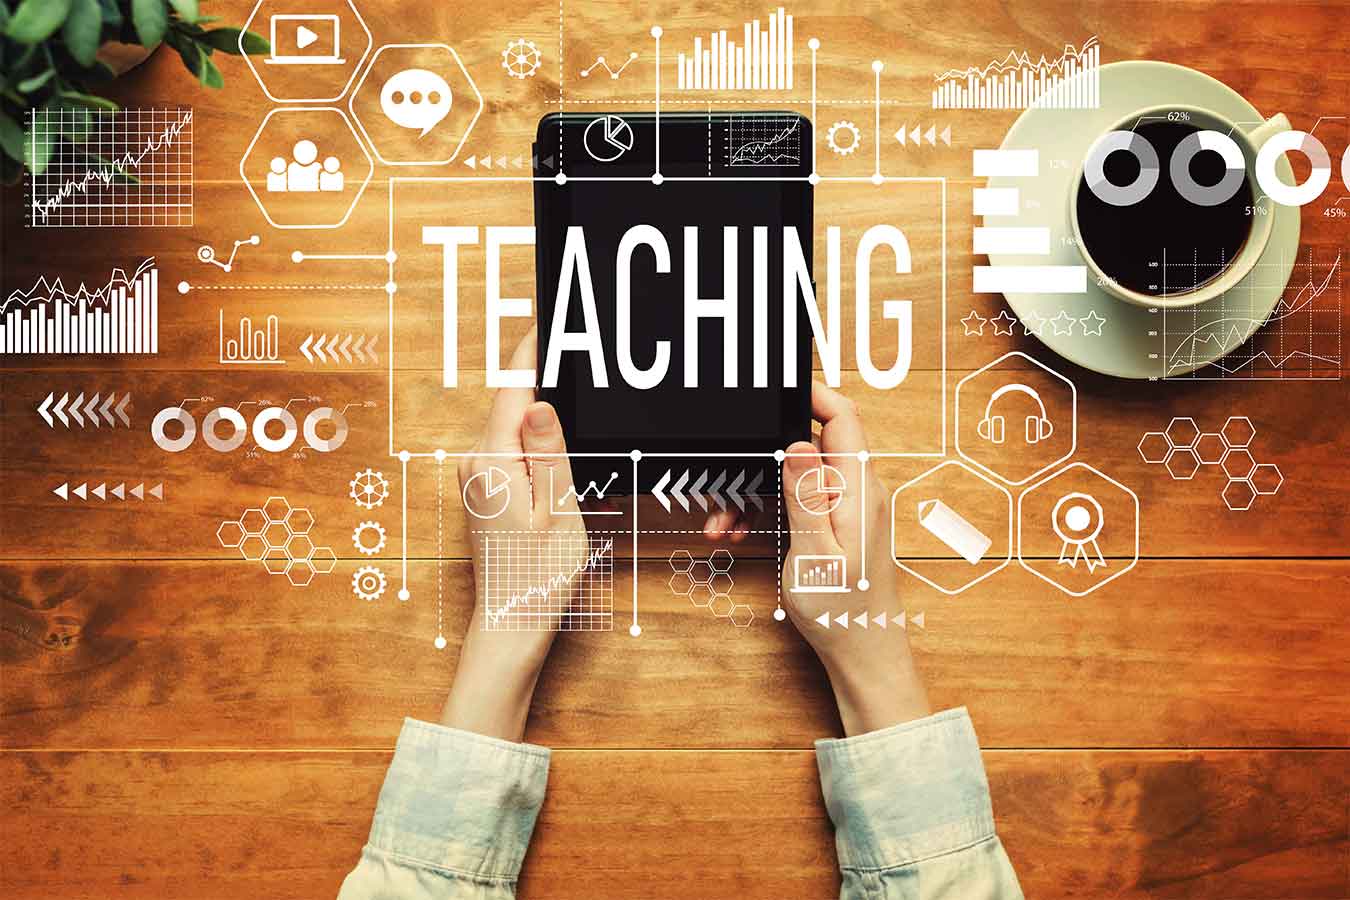 Stock image of hands holding a tablet with graphs and symbols over it surrounding the word teaching in a box.